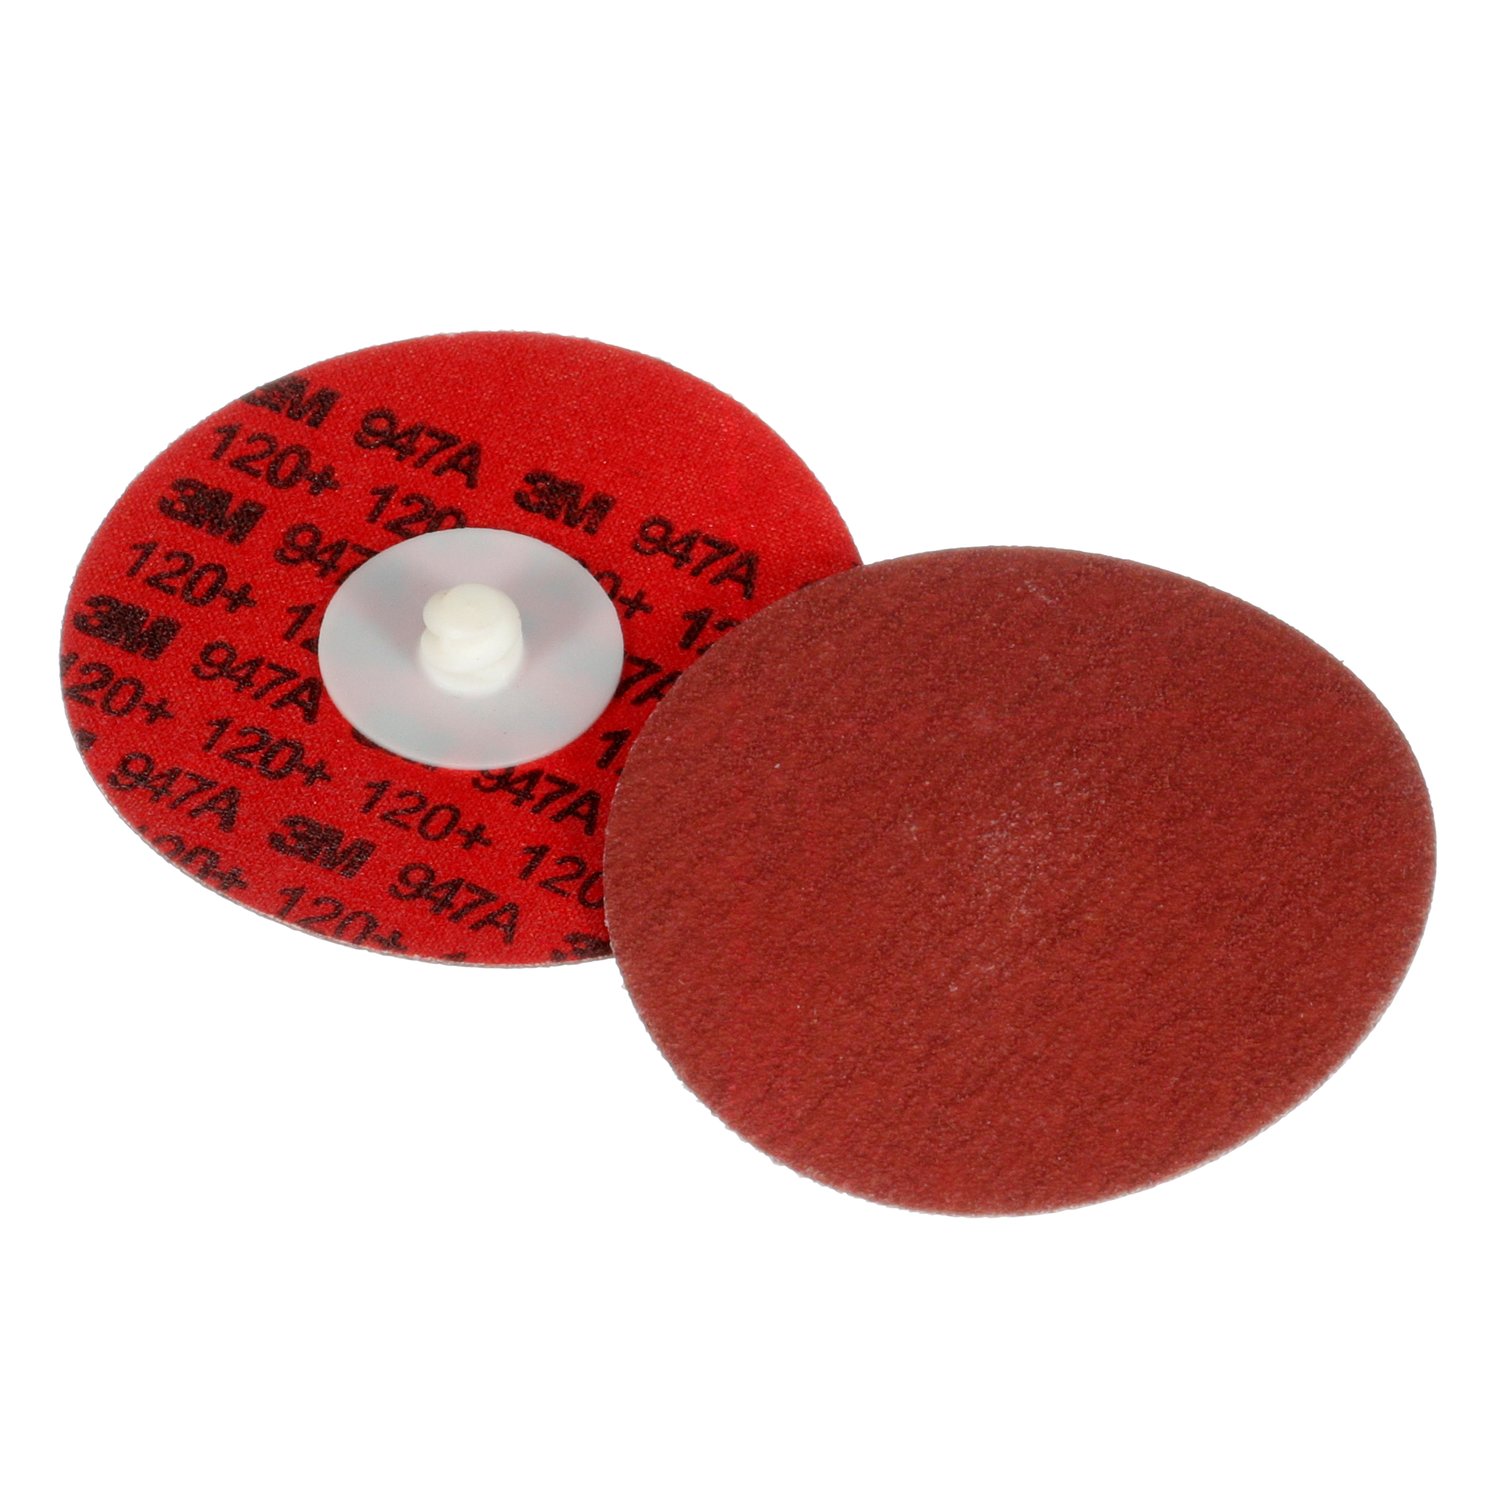 7100076934 - 3M Cubitron II Roloc Durable Edge Disc 947A, 120+, X-weight, TR, Red,
3 in, Die R300V, 50/Carton, 200 ea/Case